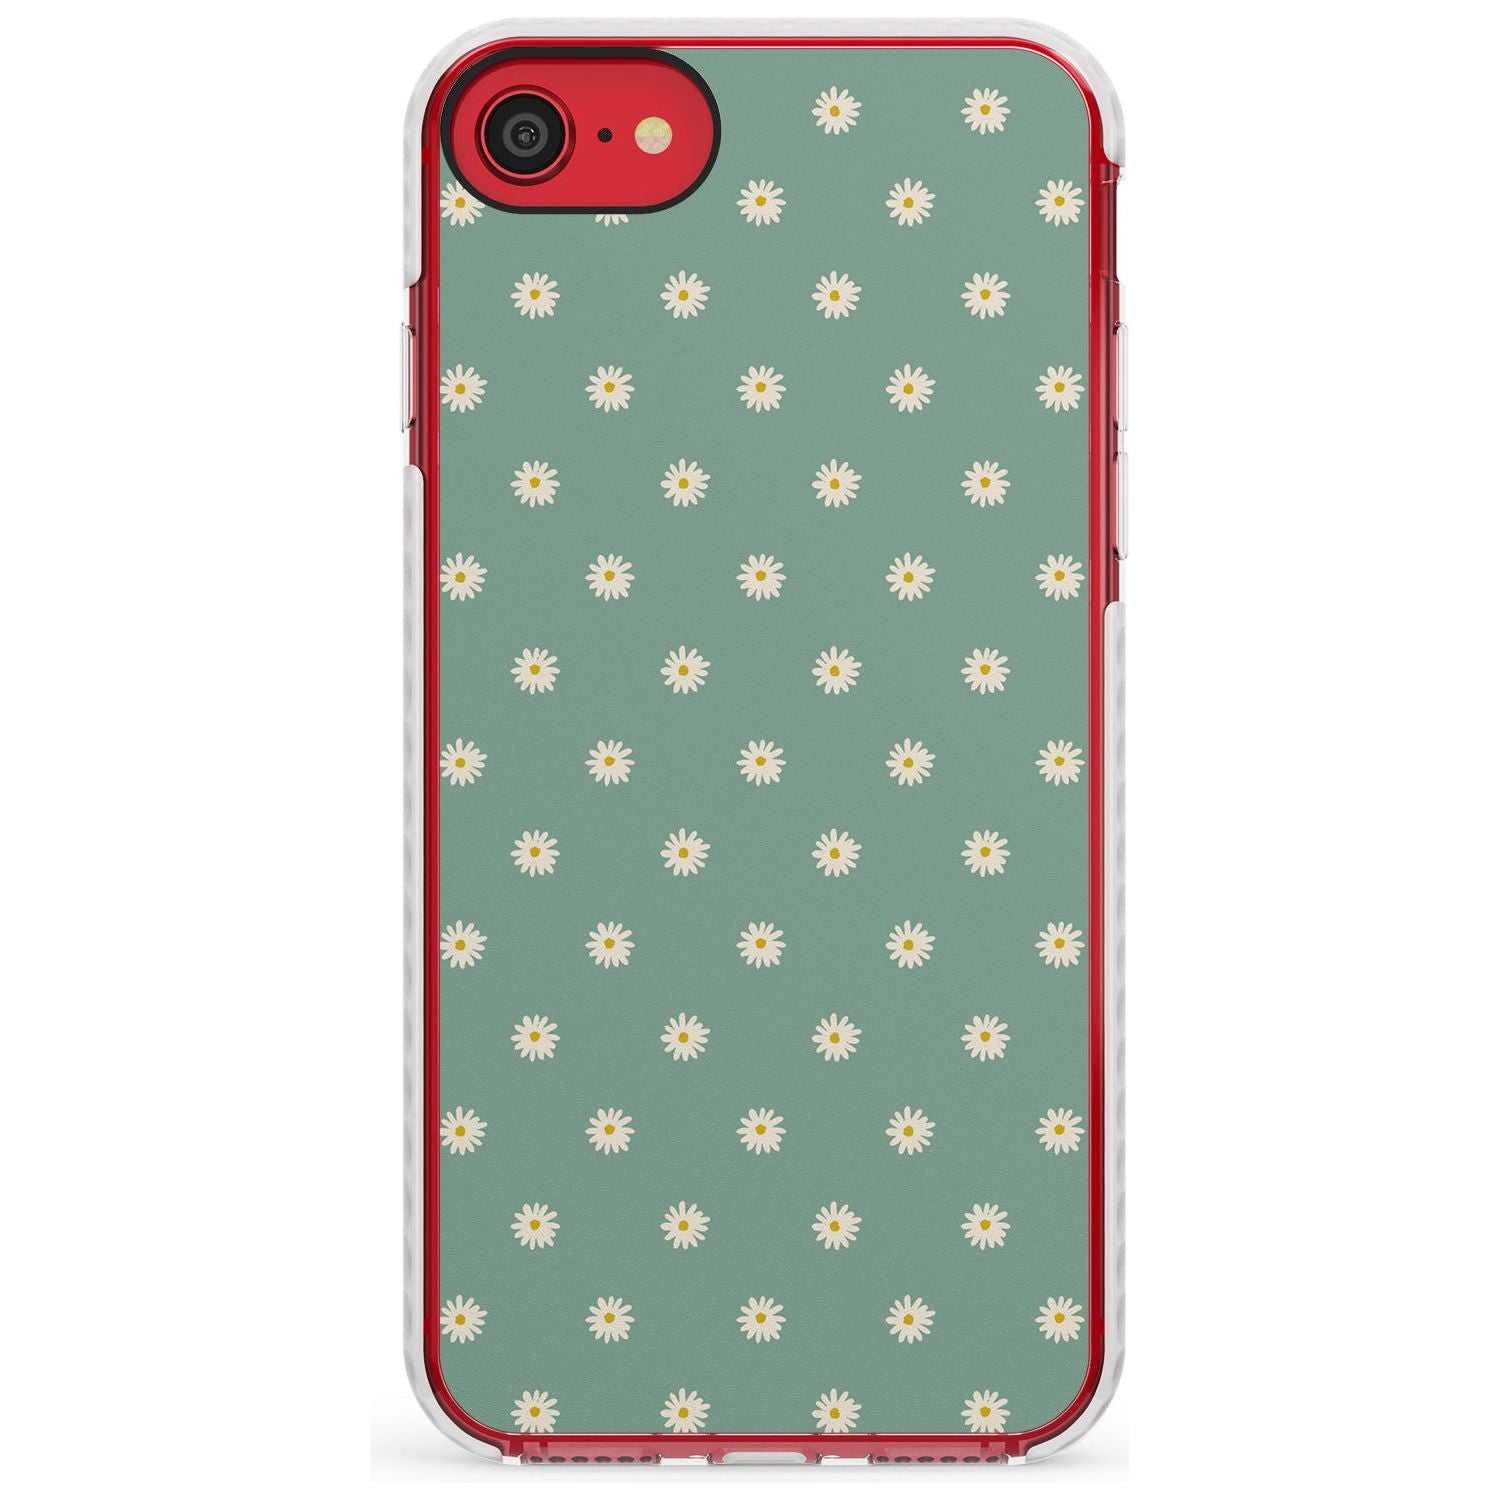 Daisy Pattern - Teal Cute Floral Daisy Design Slim TPU Phone Case for iPhone SE 8 7 Plus